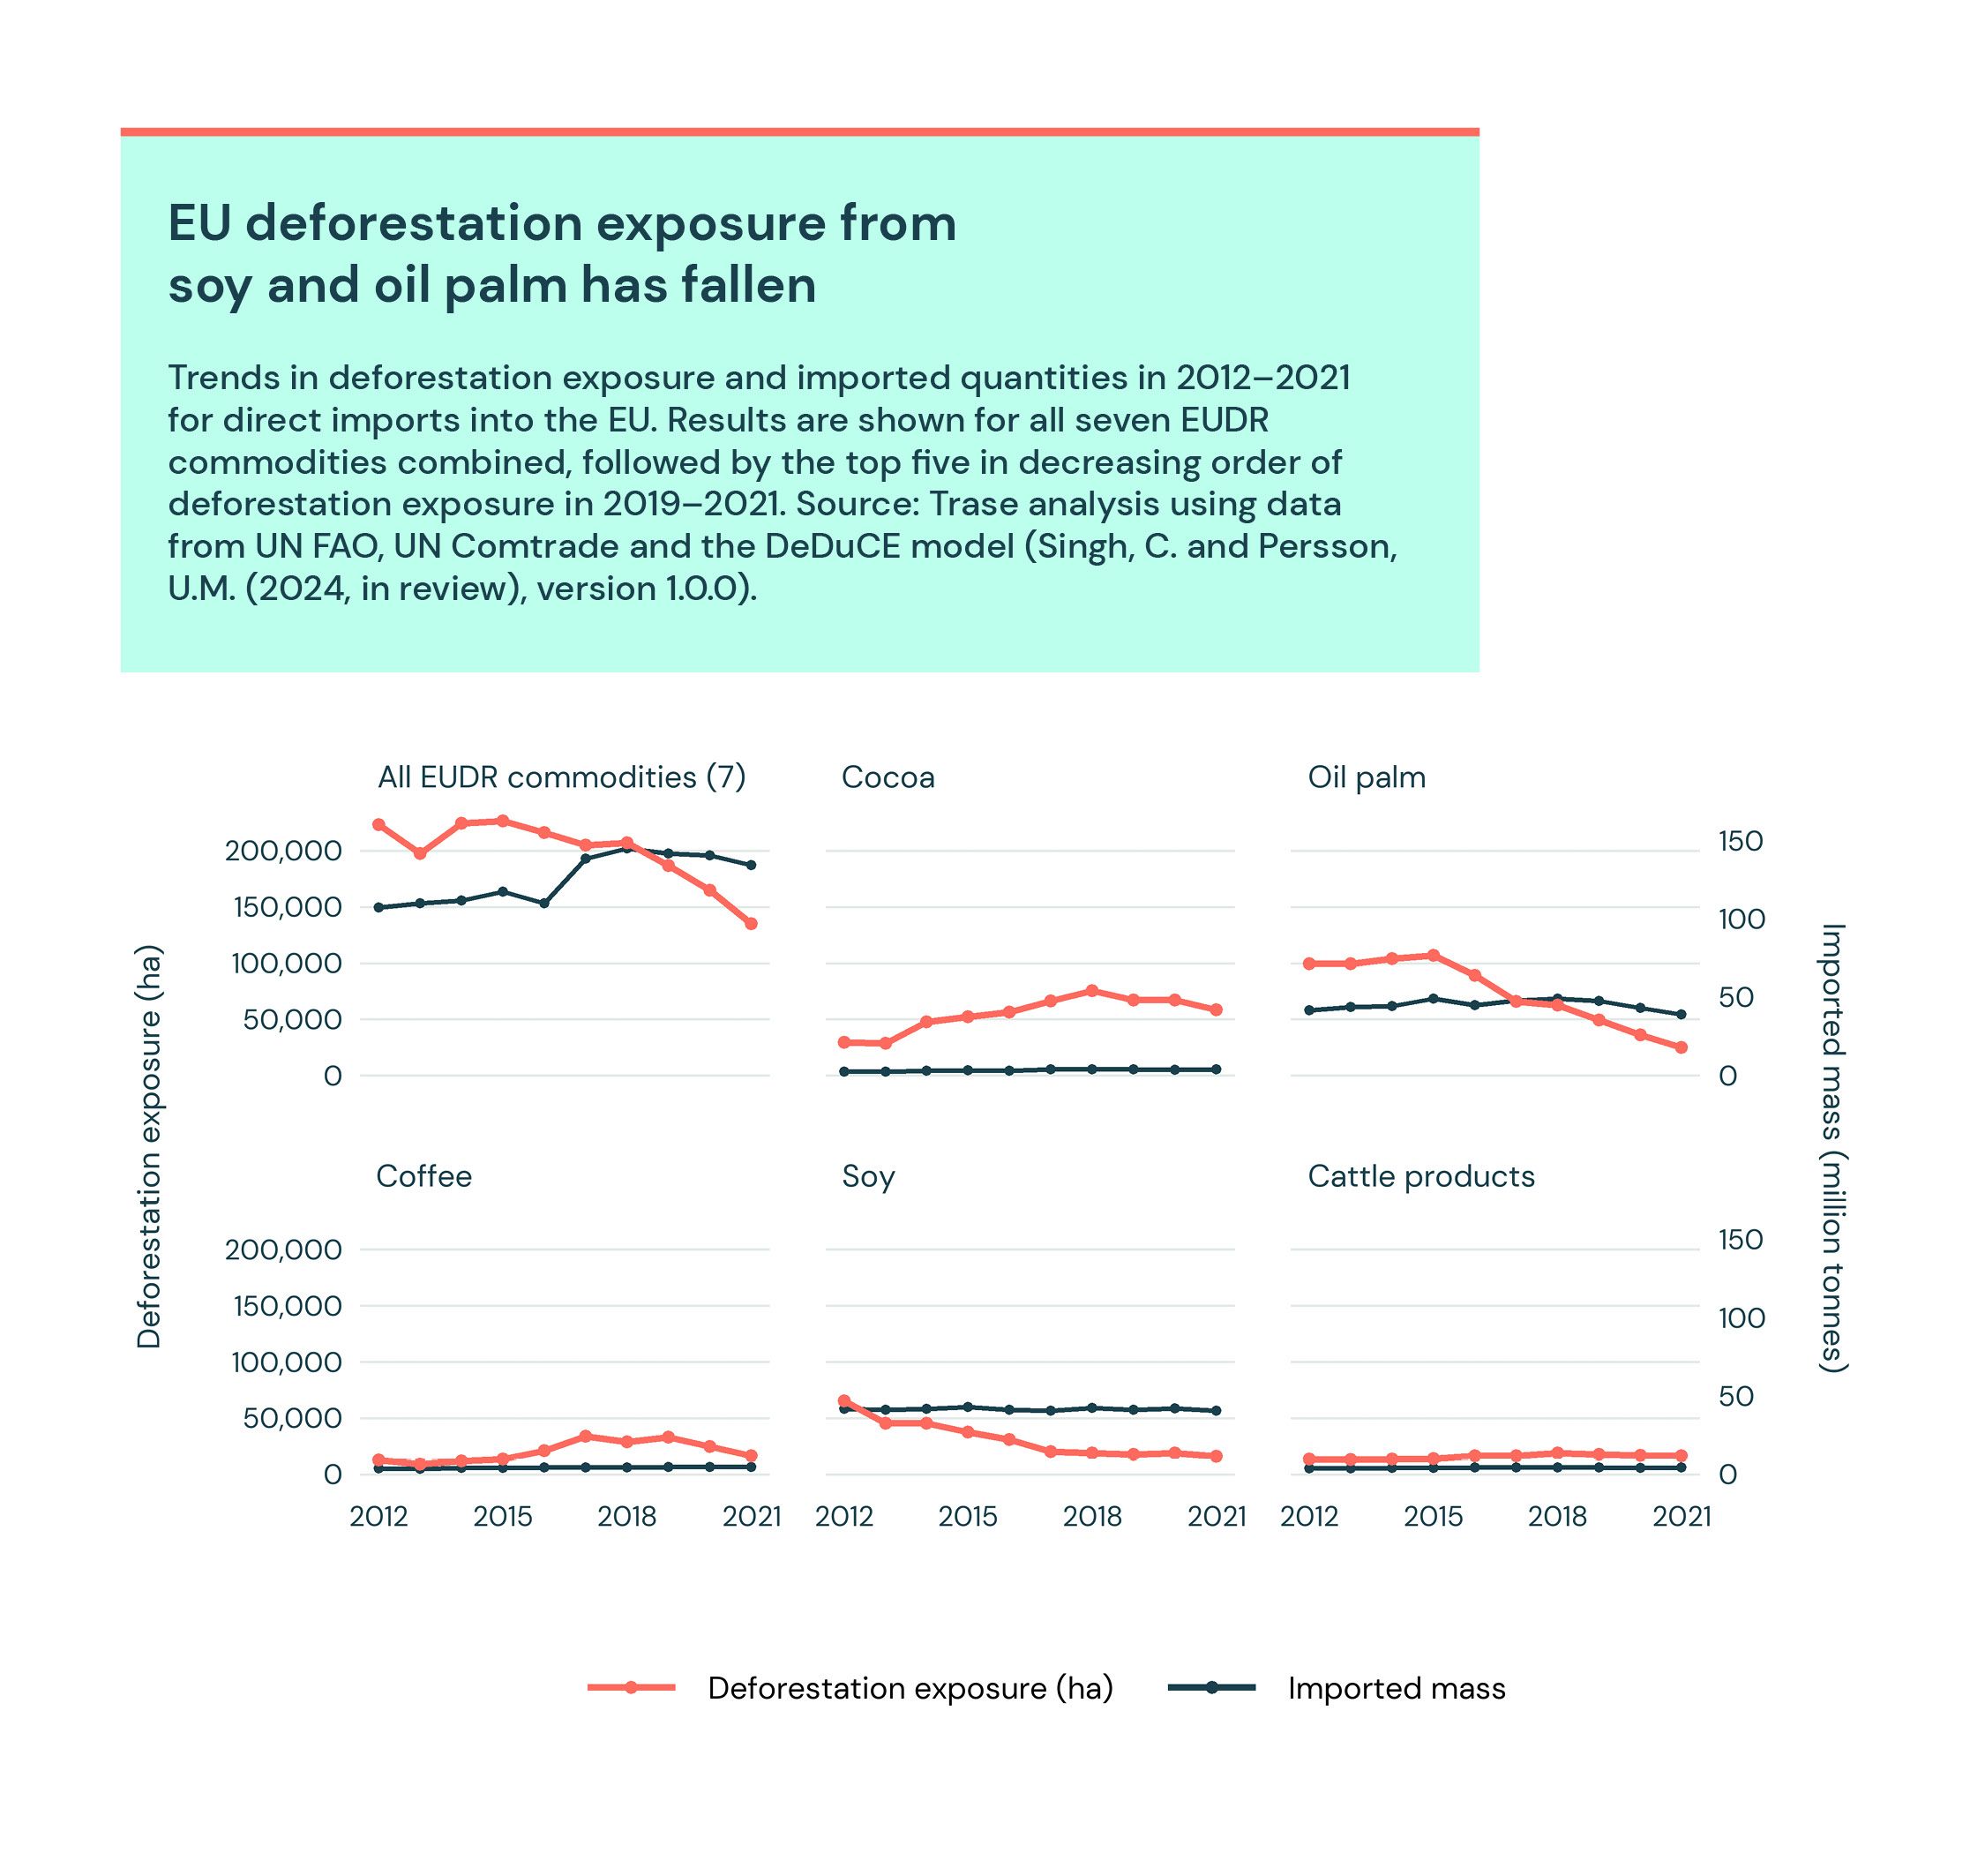 EU deforestation exposure from soy and palm oil has fallen. Trends in deforestation exposure and imported quantities in 2012–2021 for direct imports into the EU. Results are shown for all seven EUDR commodities combined, followed by the top five in decreasing order of deforestation exposure in 2019–2021. 